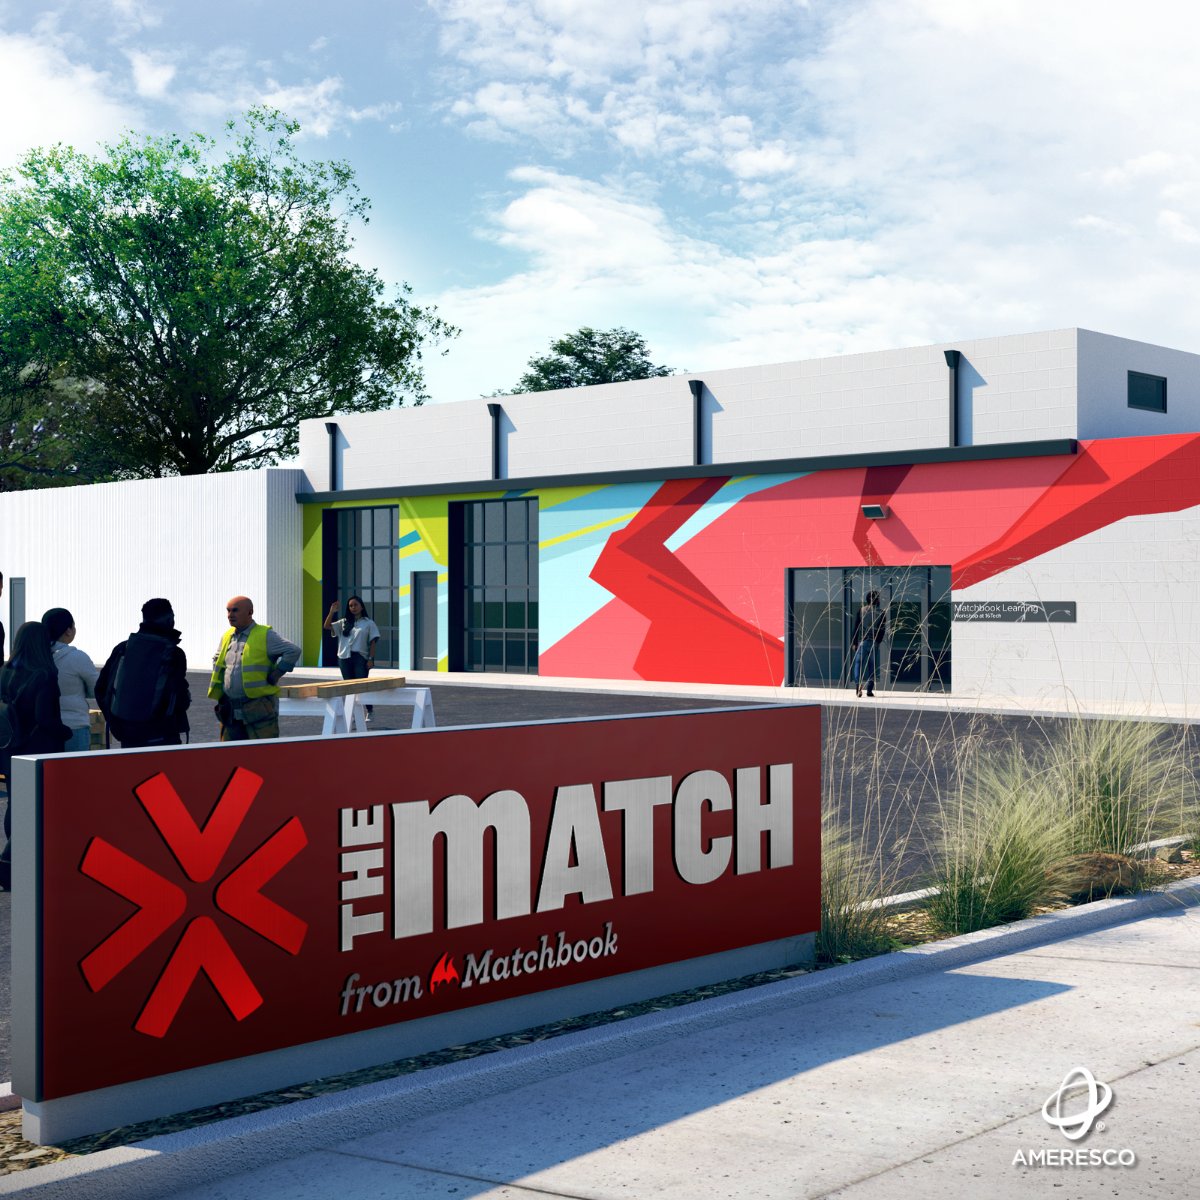 With Matchbook, we’re supporting holistic education and vocational learning for Indiana’s next generation of scholars. Learn how @ENERGY’s $5.3M grant is supporting critical #energy upgrades for The Match High School and Career Center at: hubs.ly/Q02p-8l80